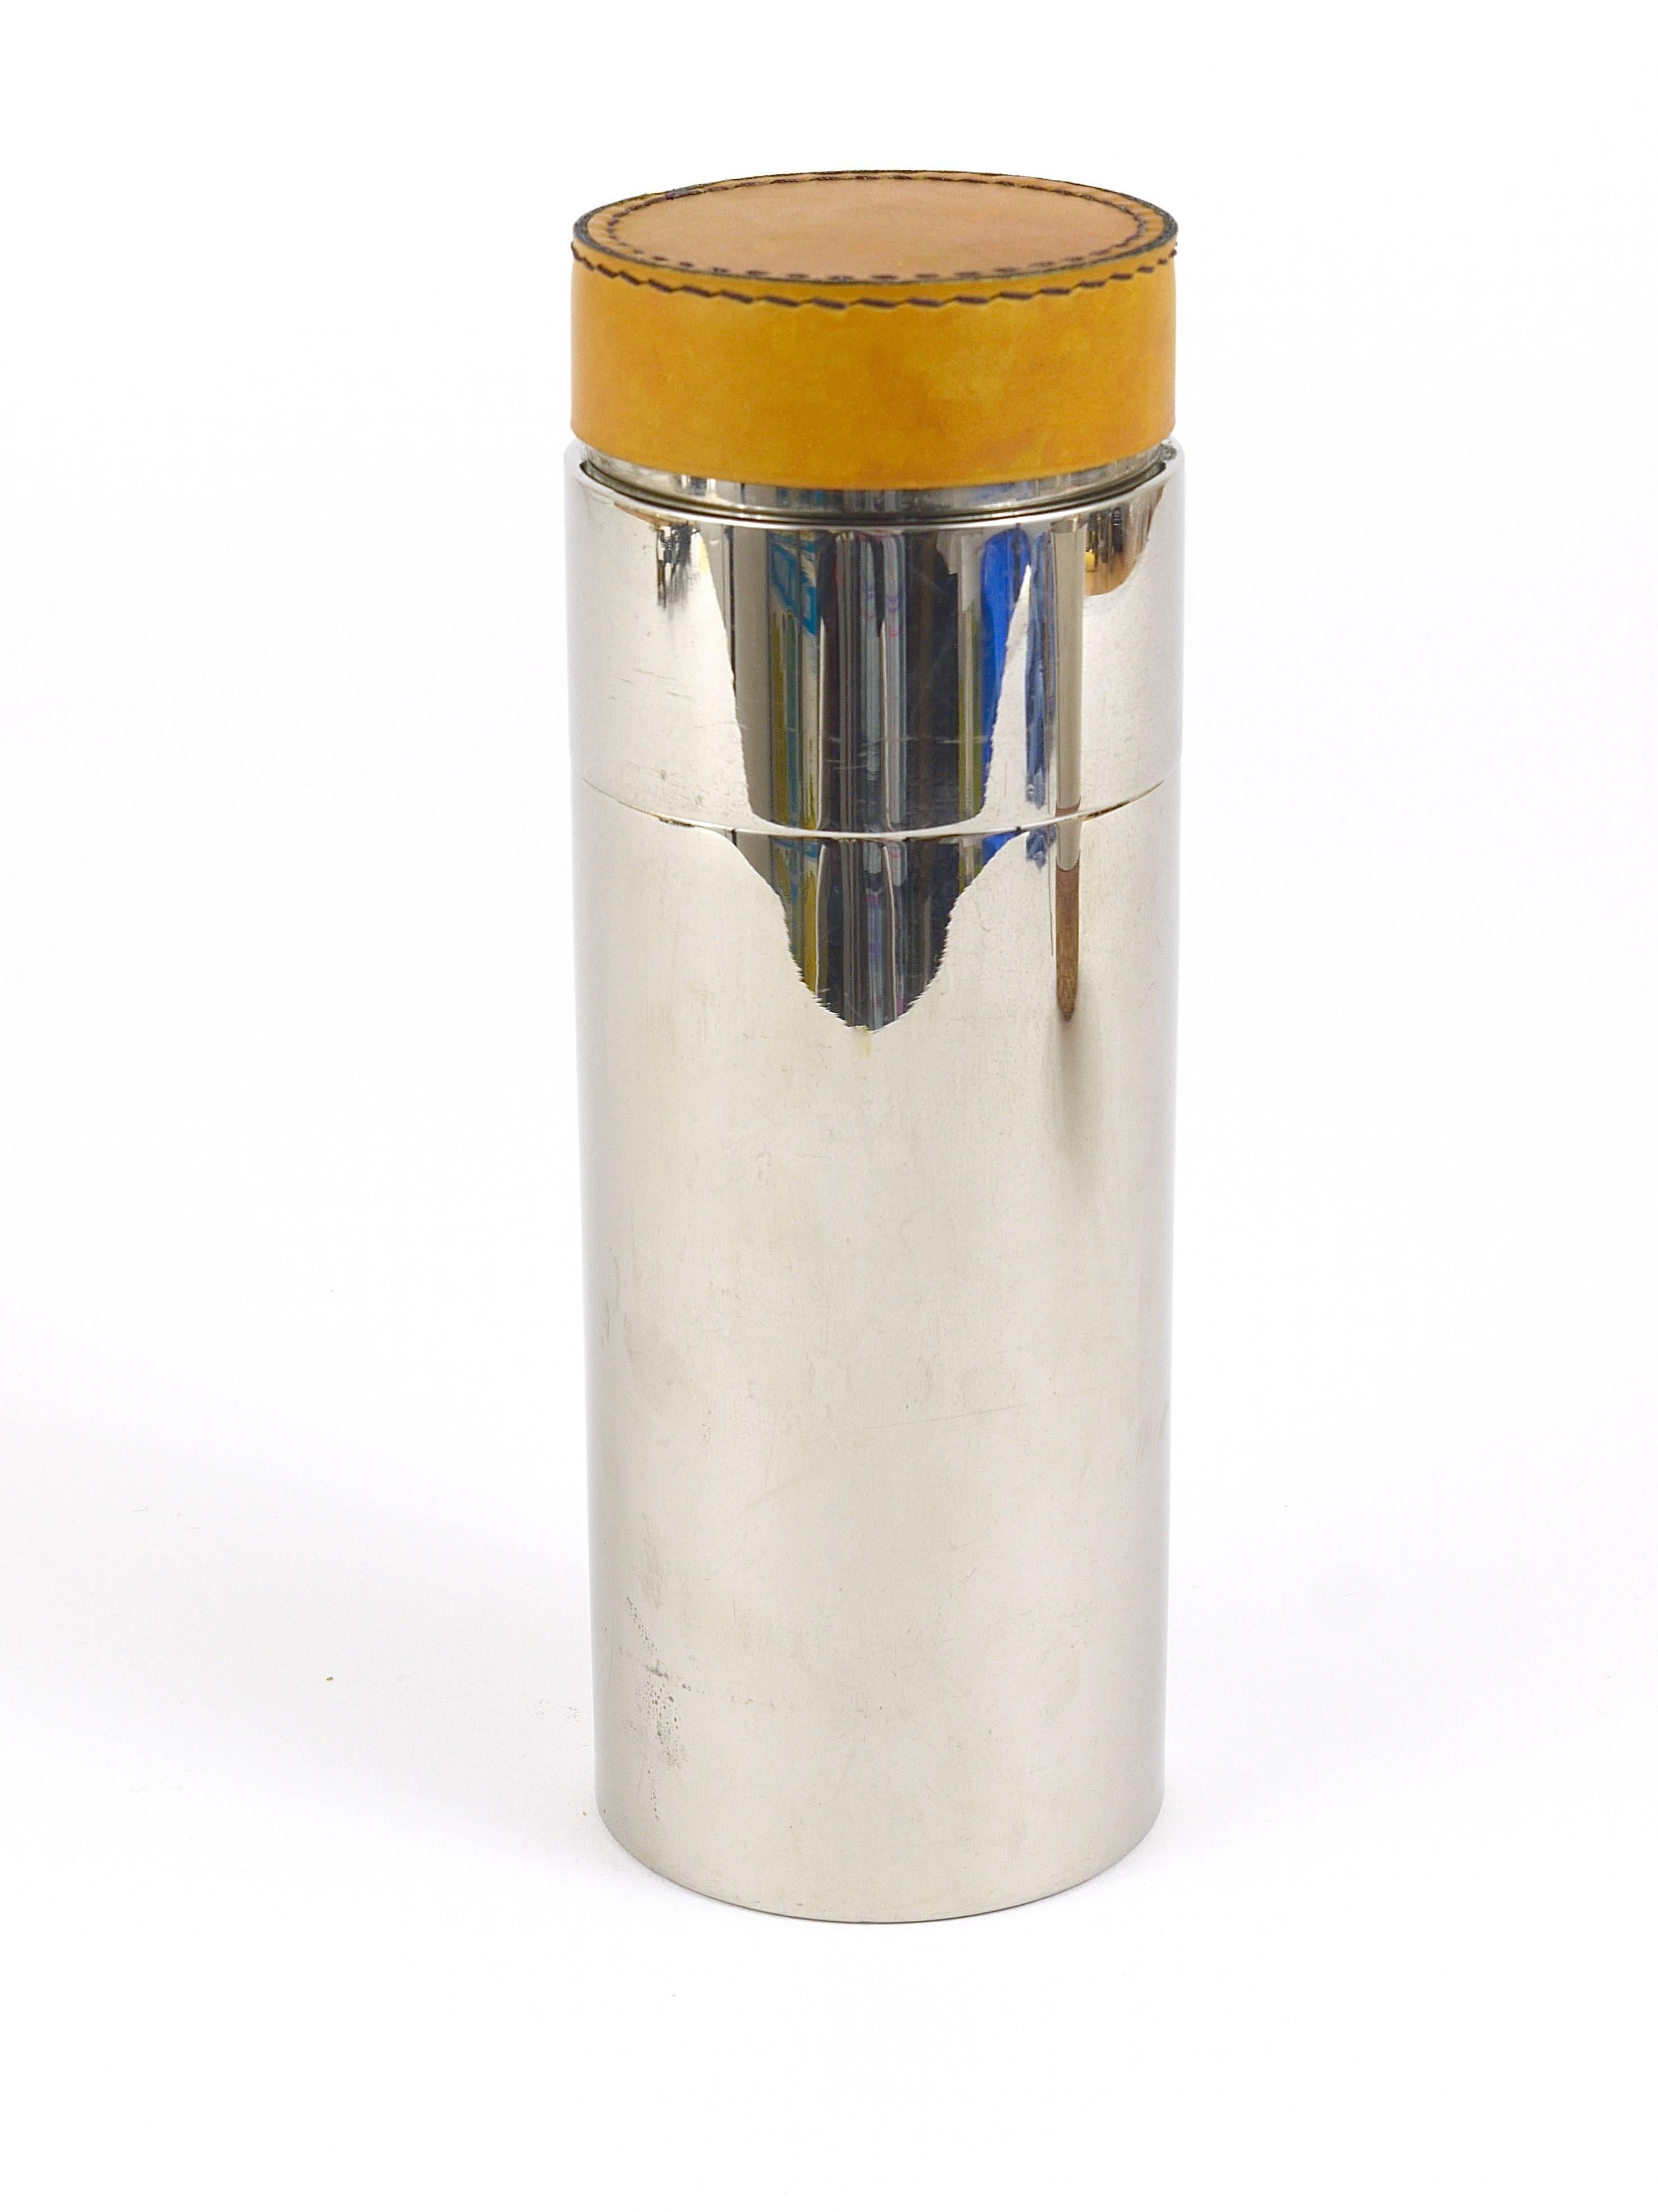 Carl Auböck Nickel-Plated Cocktail Shaker, Brass, Leather, Austria, 1950s 3